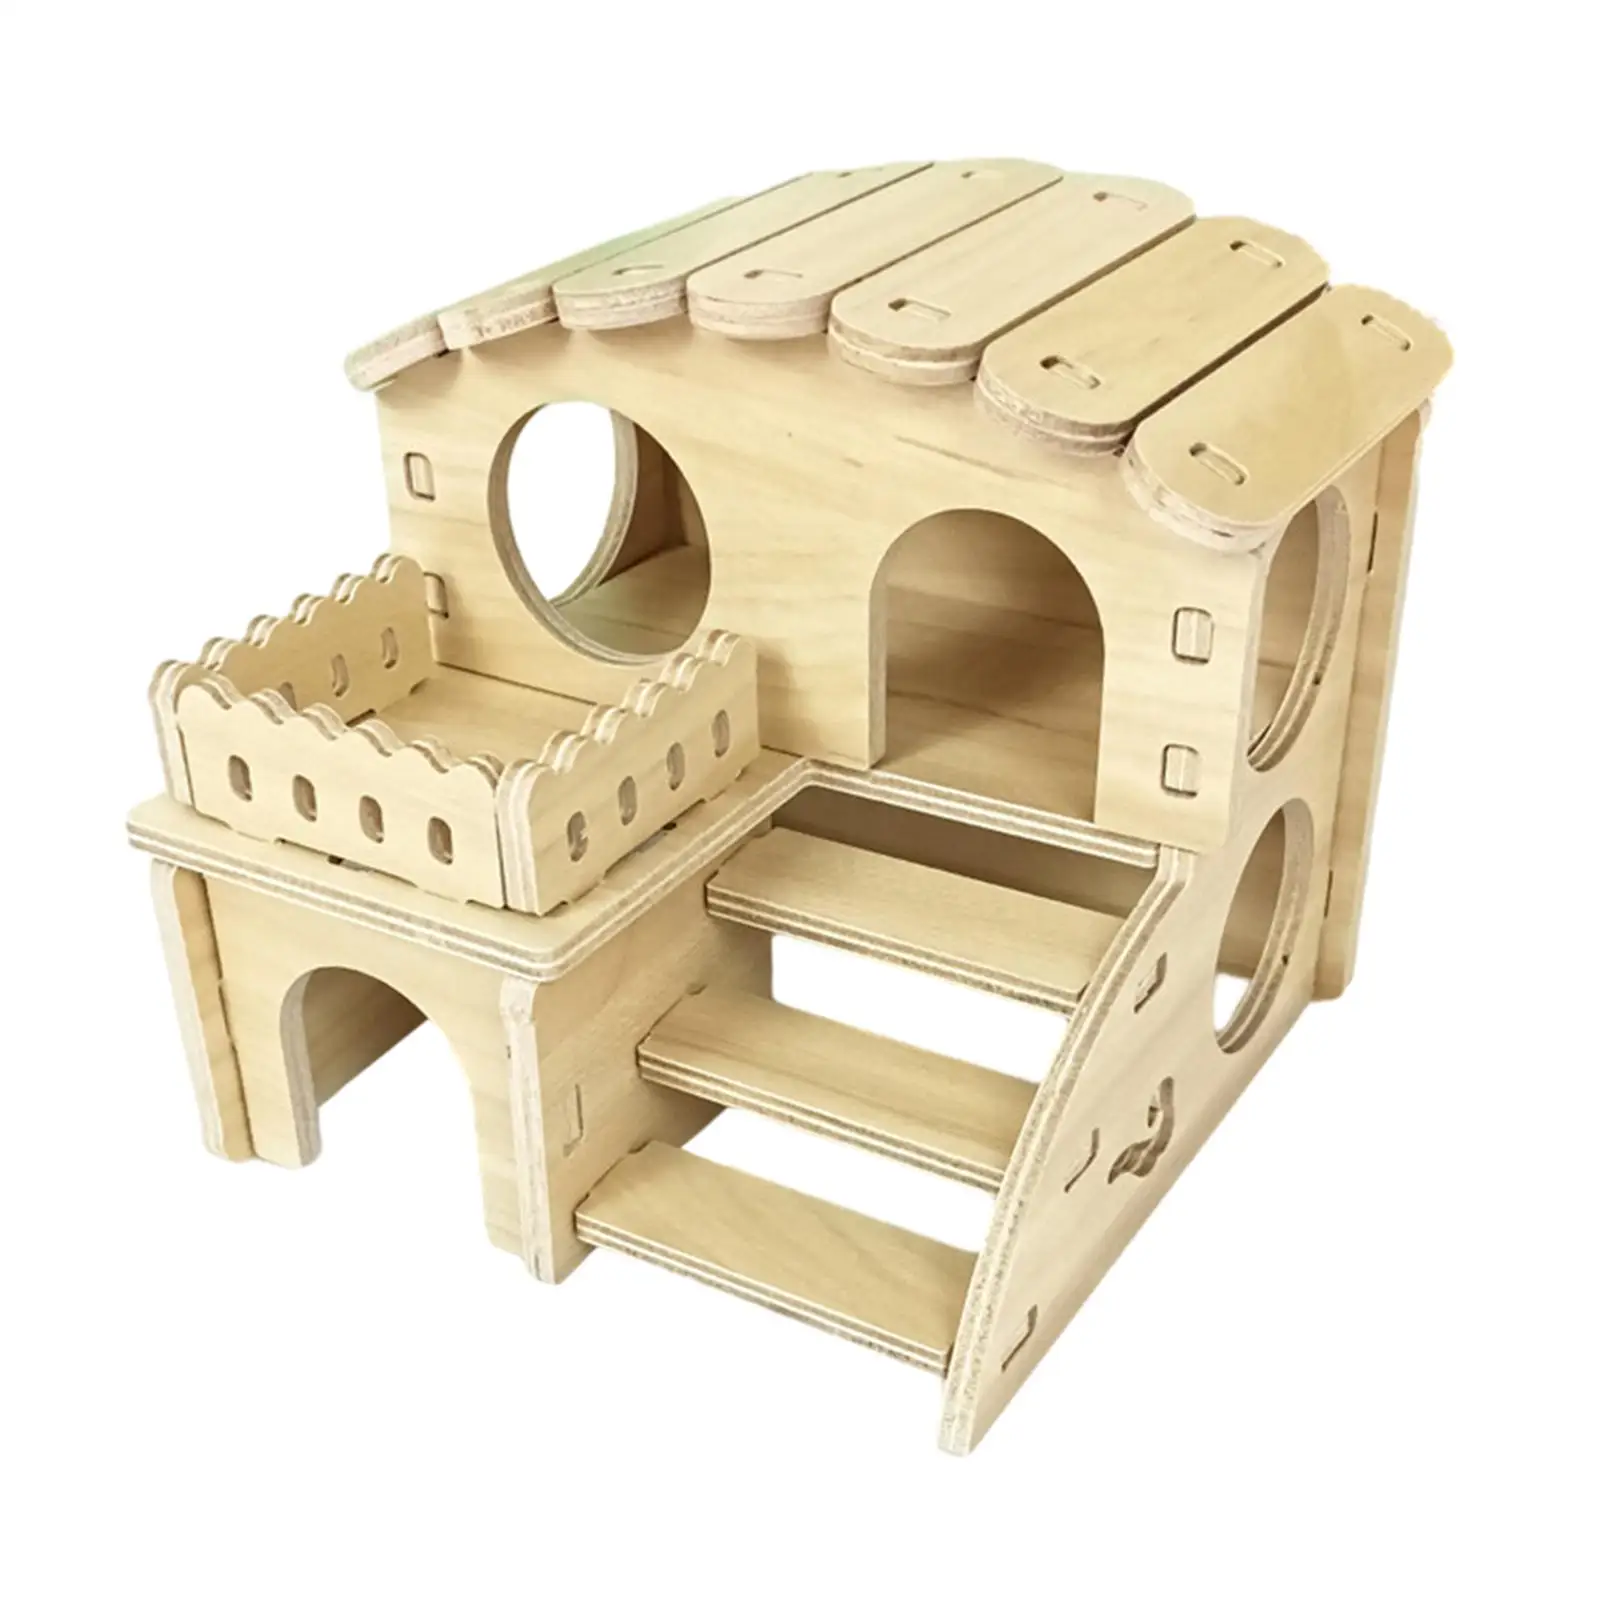 Washable Hamster Hideaway Small Animal Habitat Decor Wood Small Animal Hideout Hut Play Toys Hamster House for Dwarf Mice